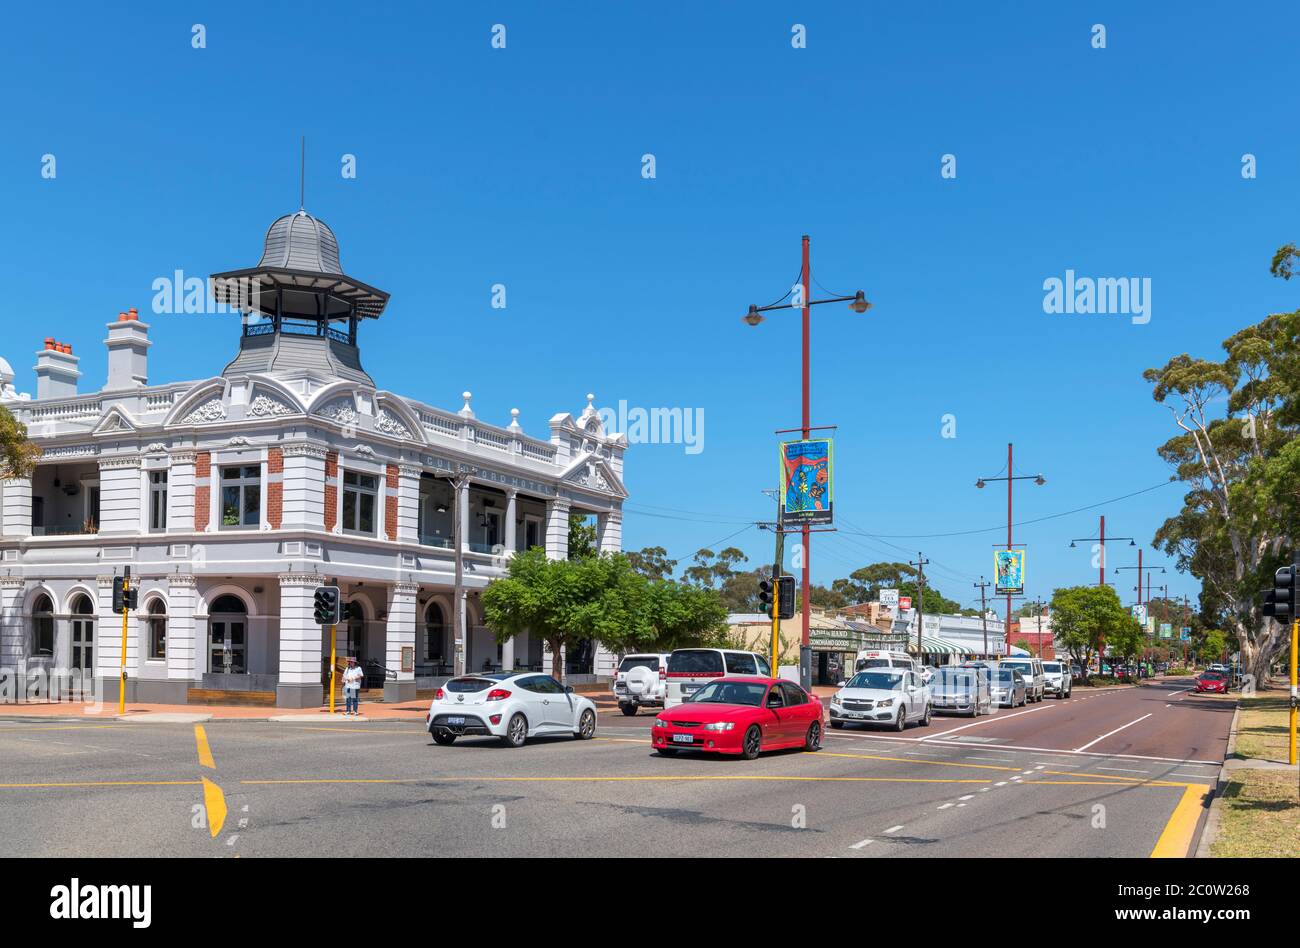 The Guildford Hotel on James Street (The Great Eastern Highway) in the town of Guildford, Swan Valley, Perth, Western Australia, Australia Stock Photo